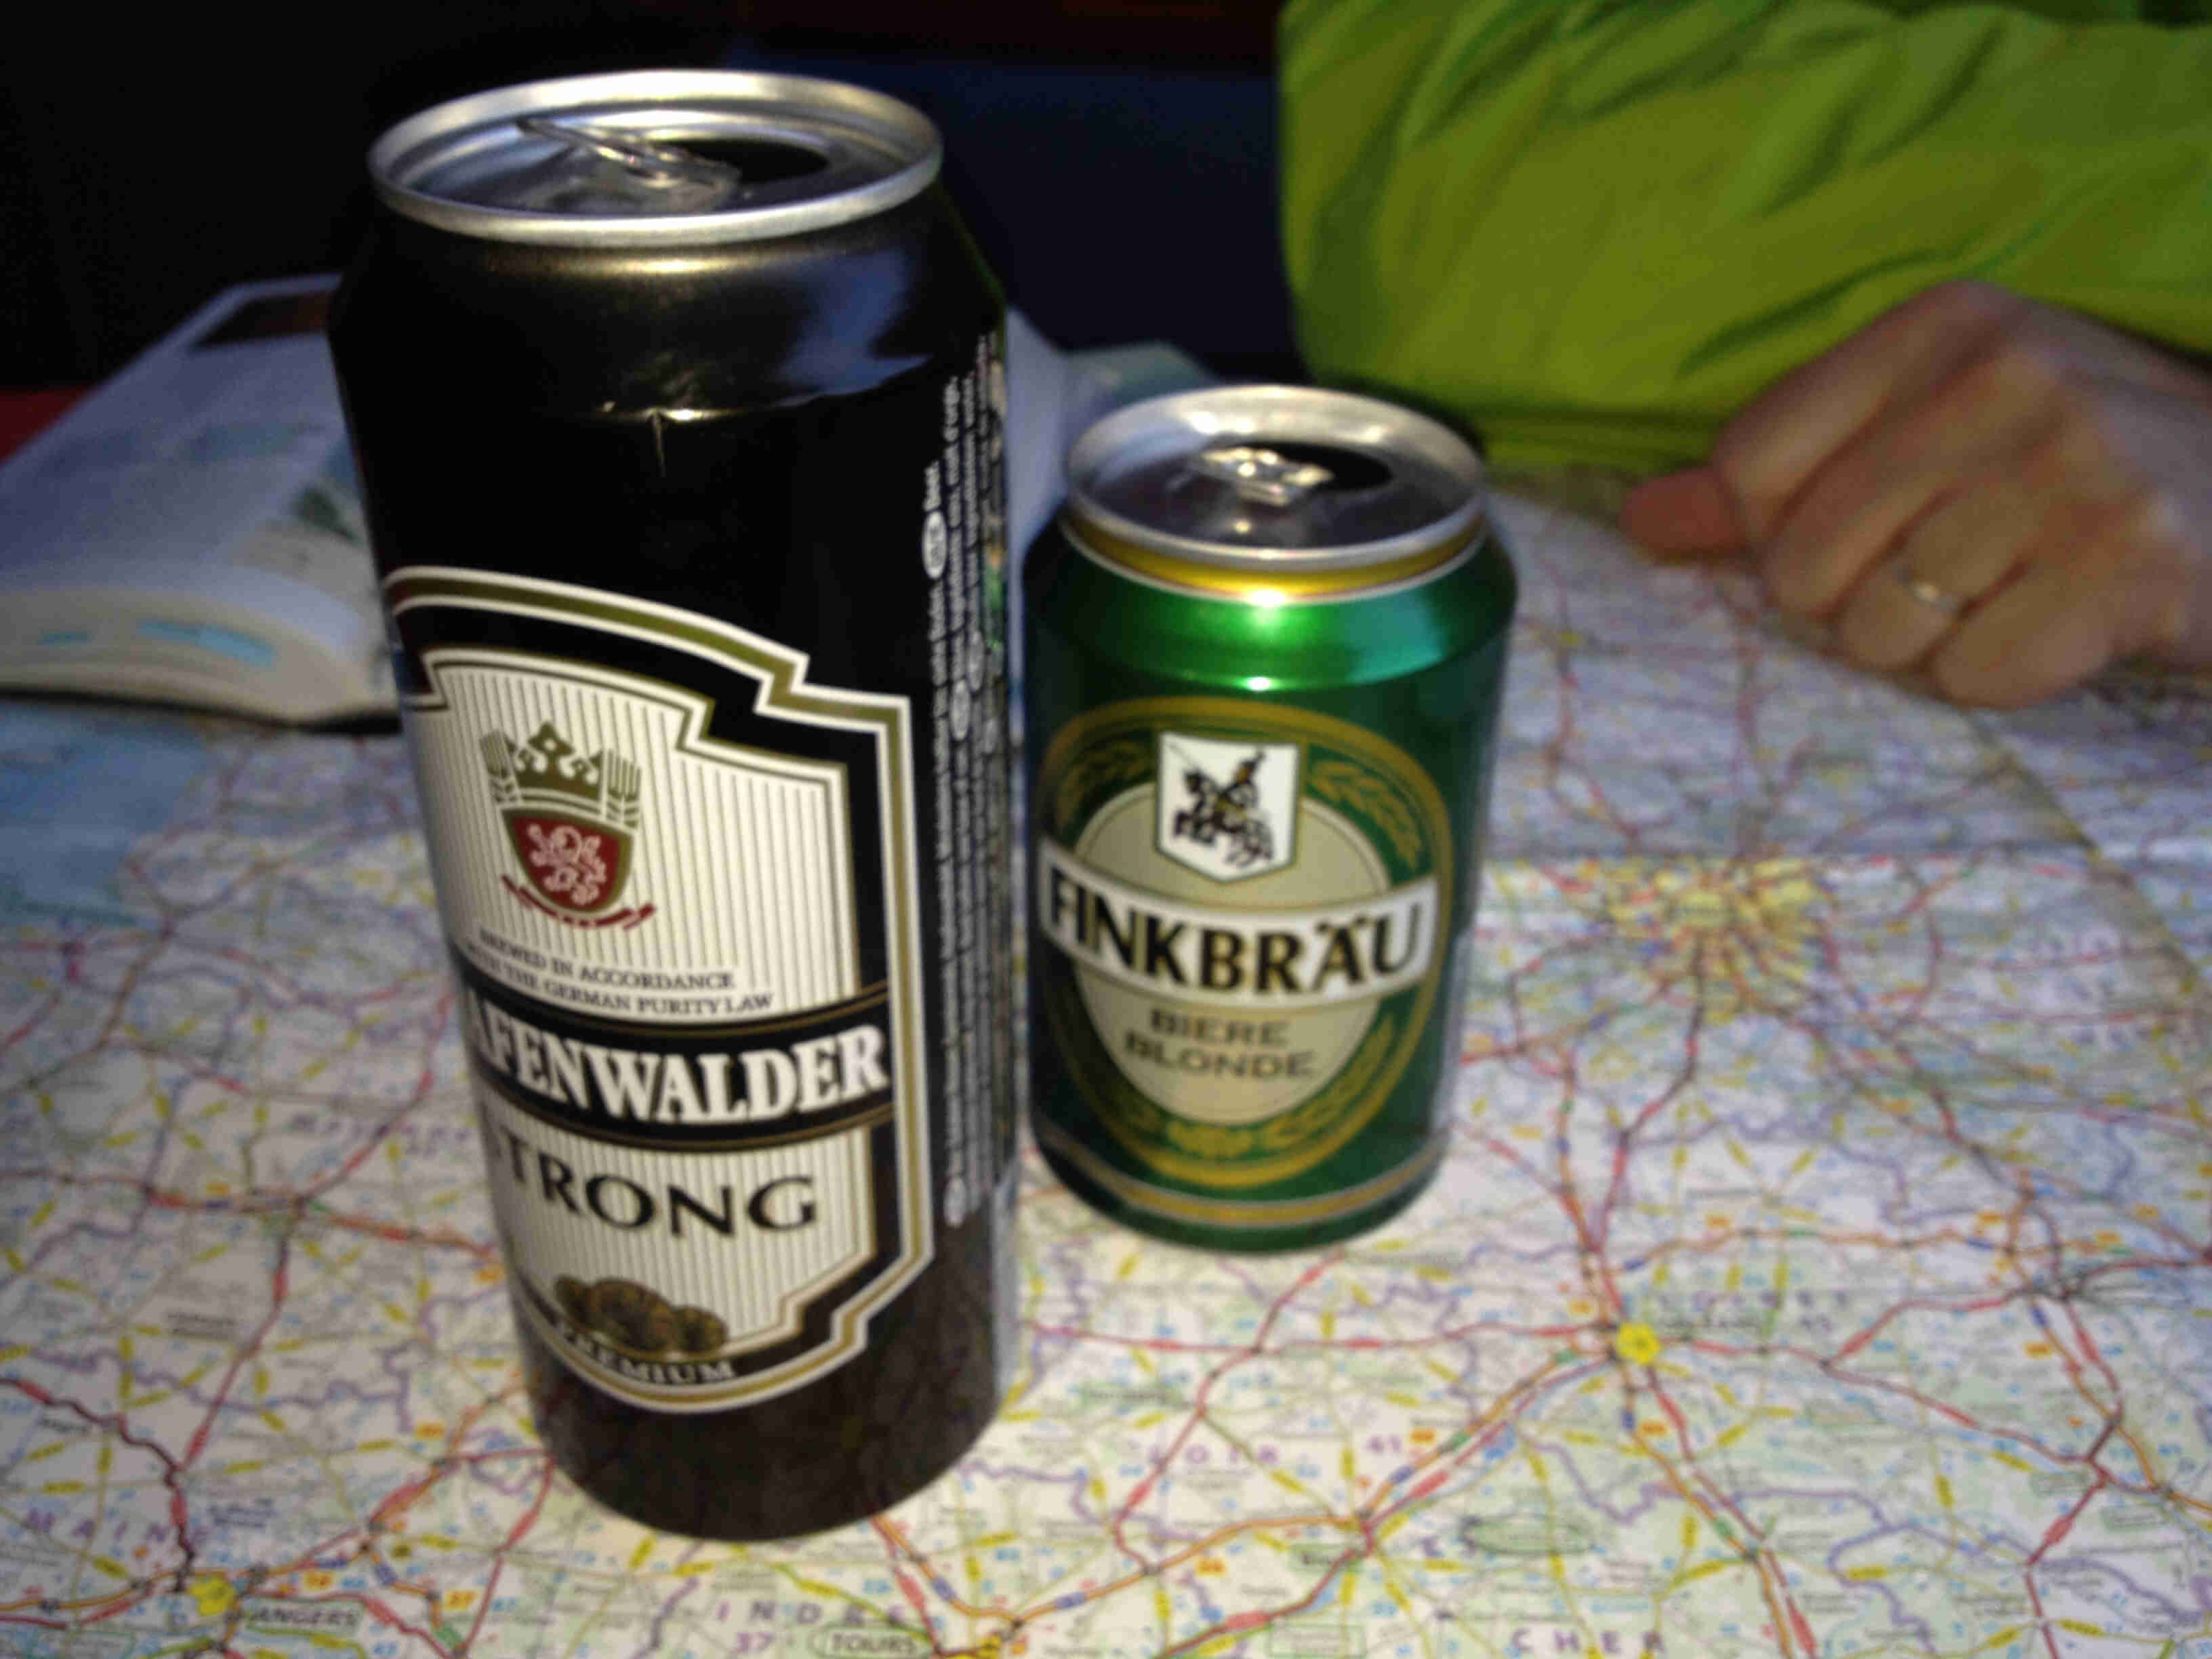 Side view of 2 beer cans, standing on top of a paper map